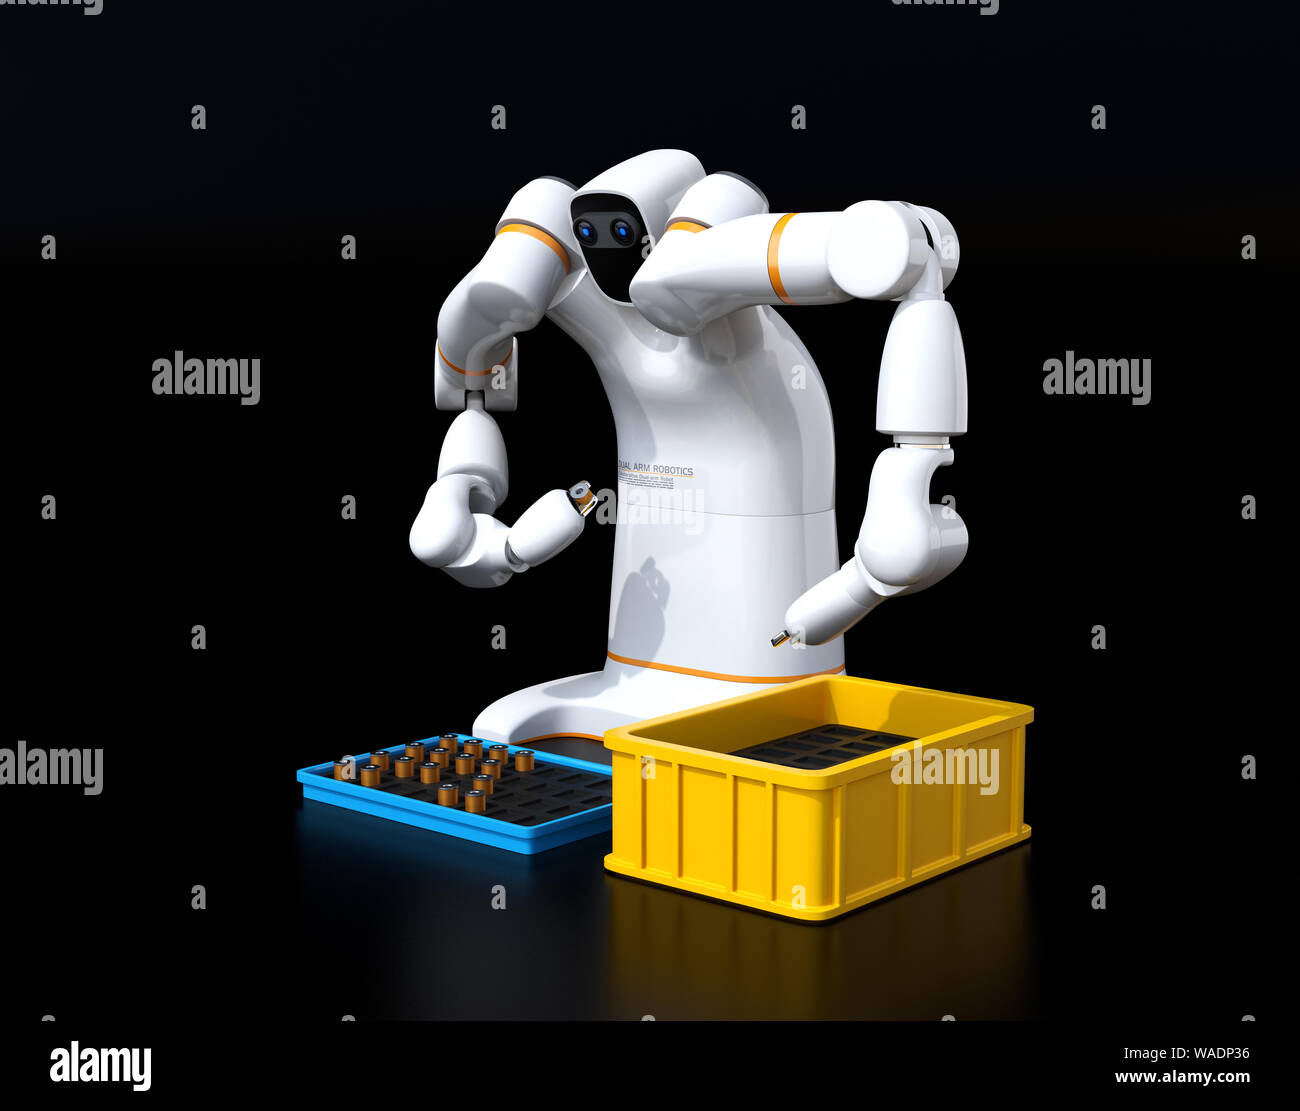 White dual-arm robot on black background. Collaborative robot concept. 3D rendering image. Stock Photo